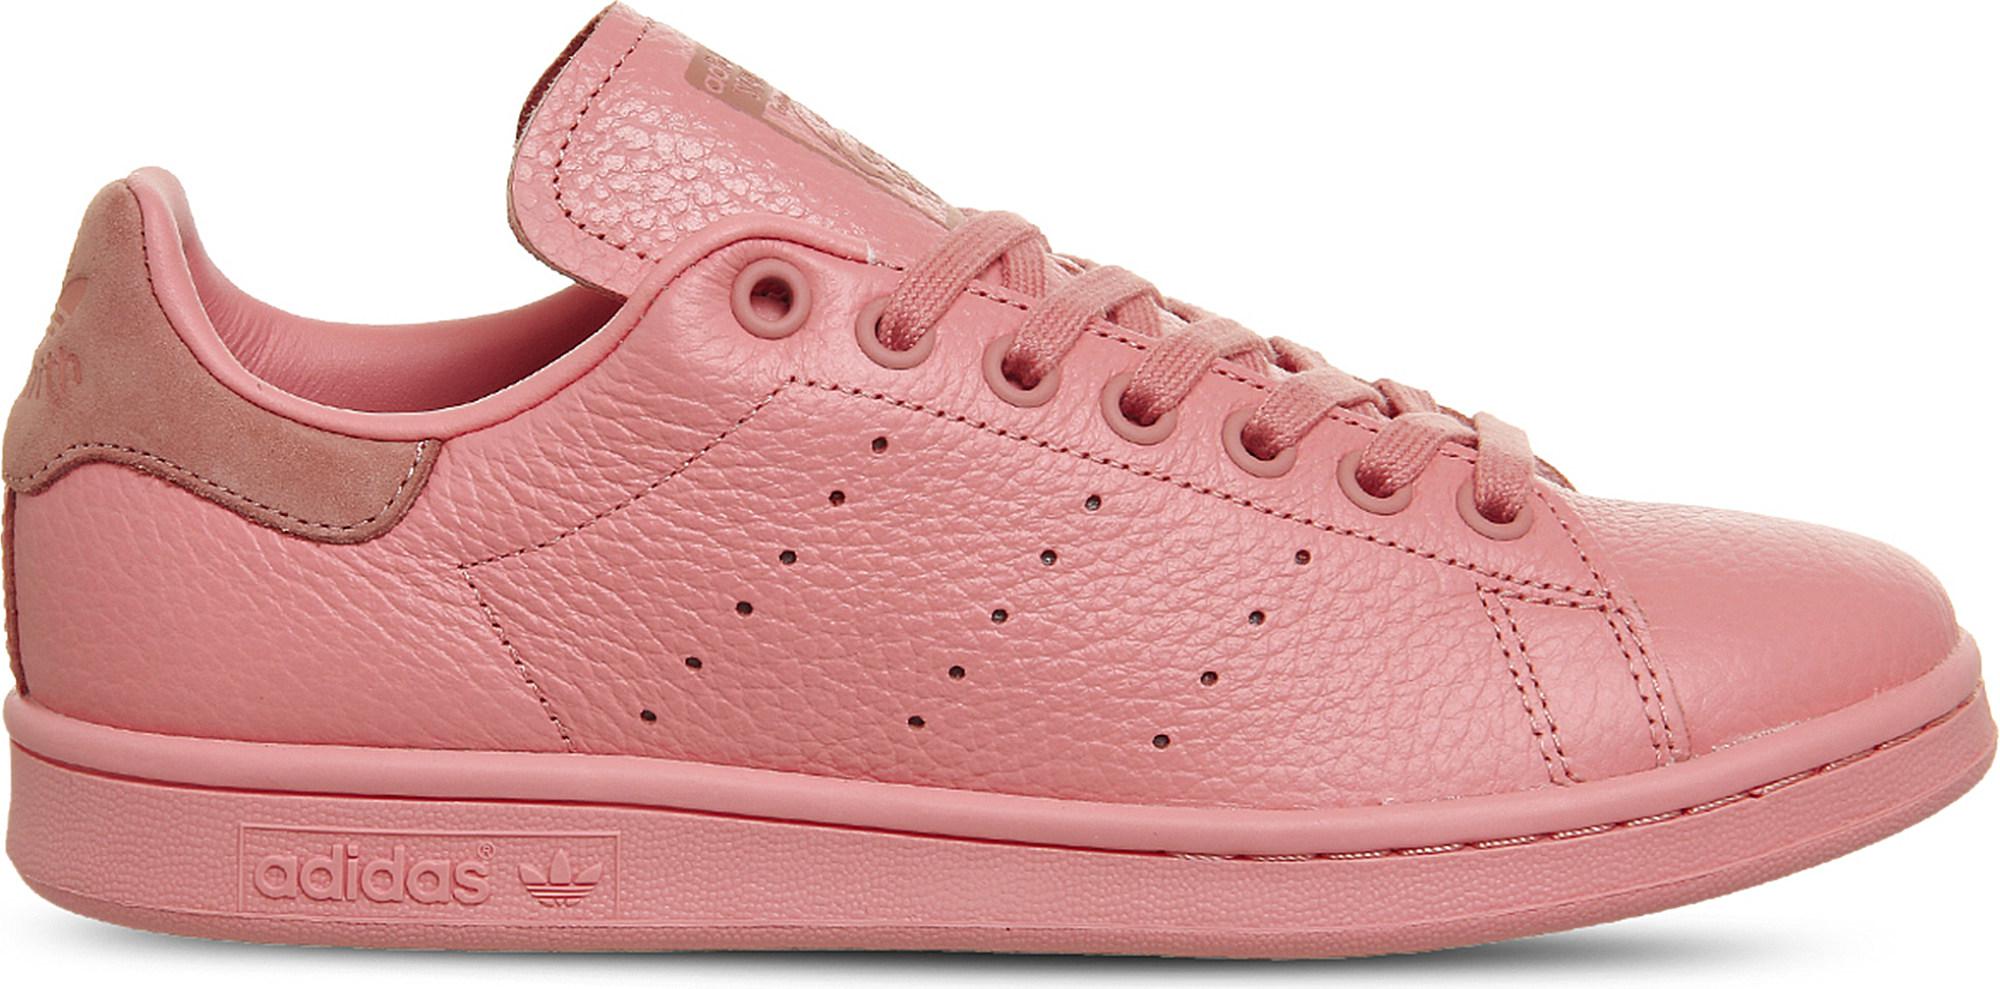 adidas Stan Smith Leather Trainers in Pink - Lyst